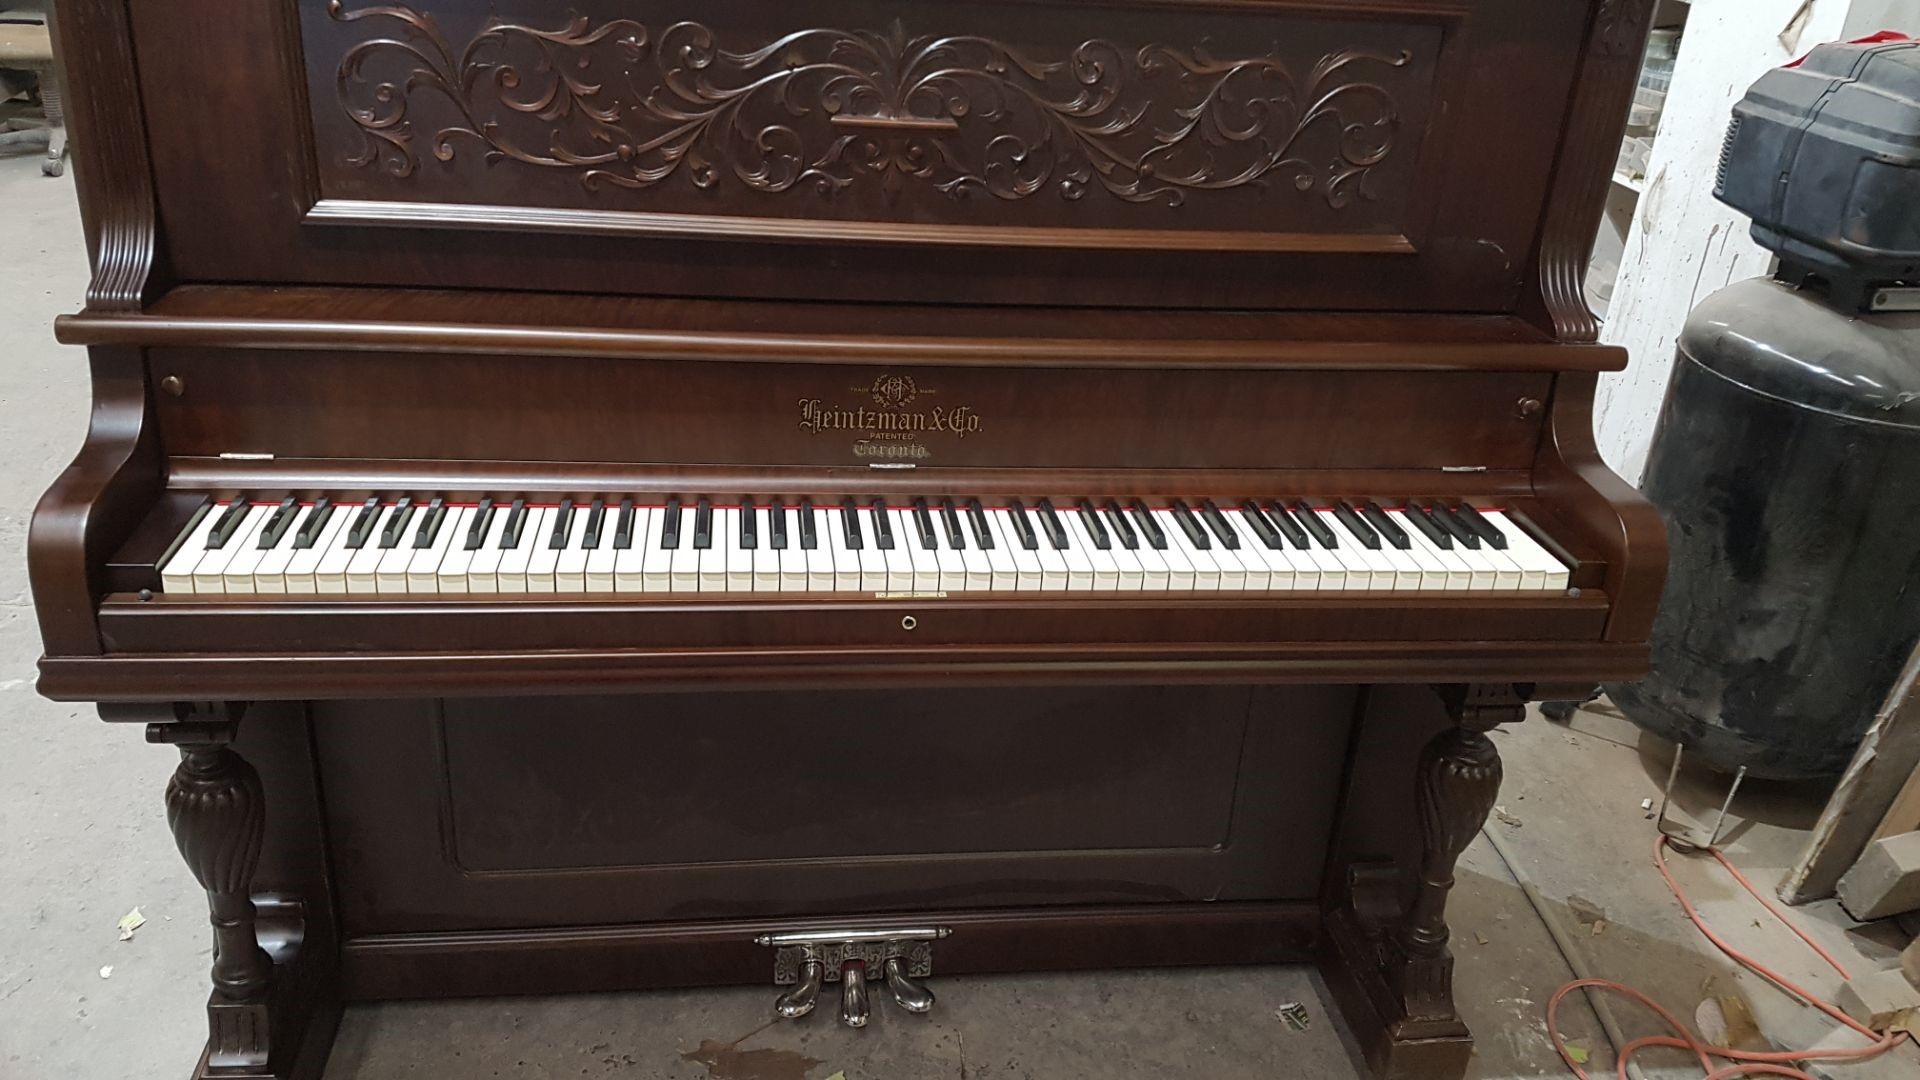 Is your piano scratched or in need of refinishing?  Is it old and does it have cracks?
Call Angelo's Furniture Restoration at 647-560-2788